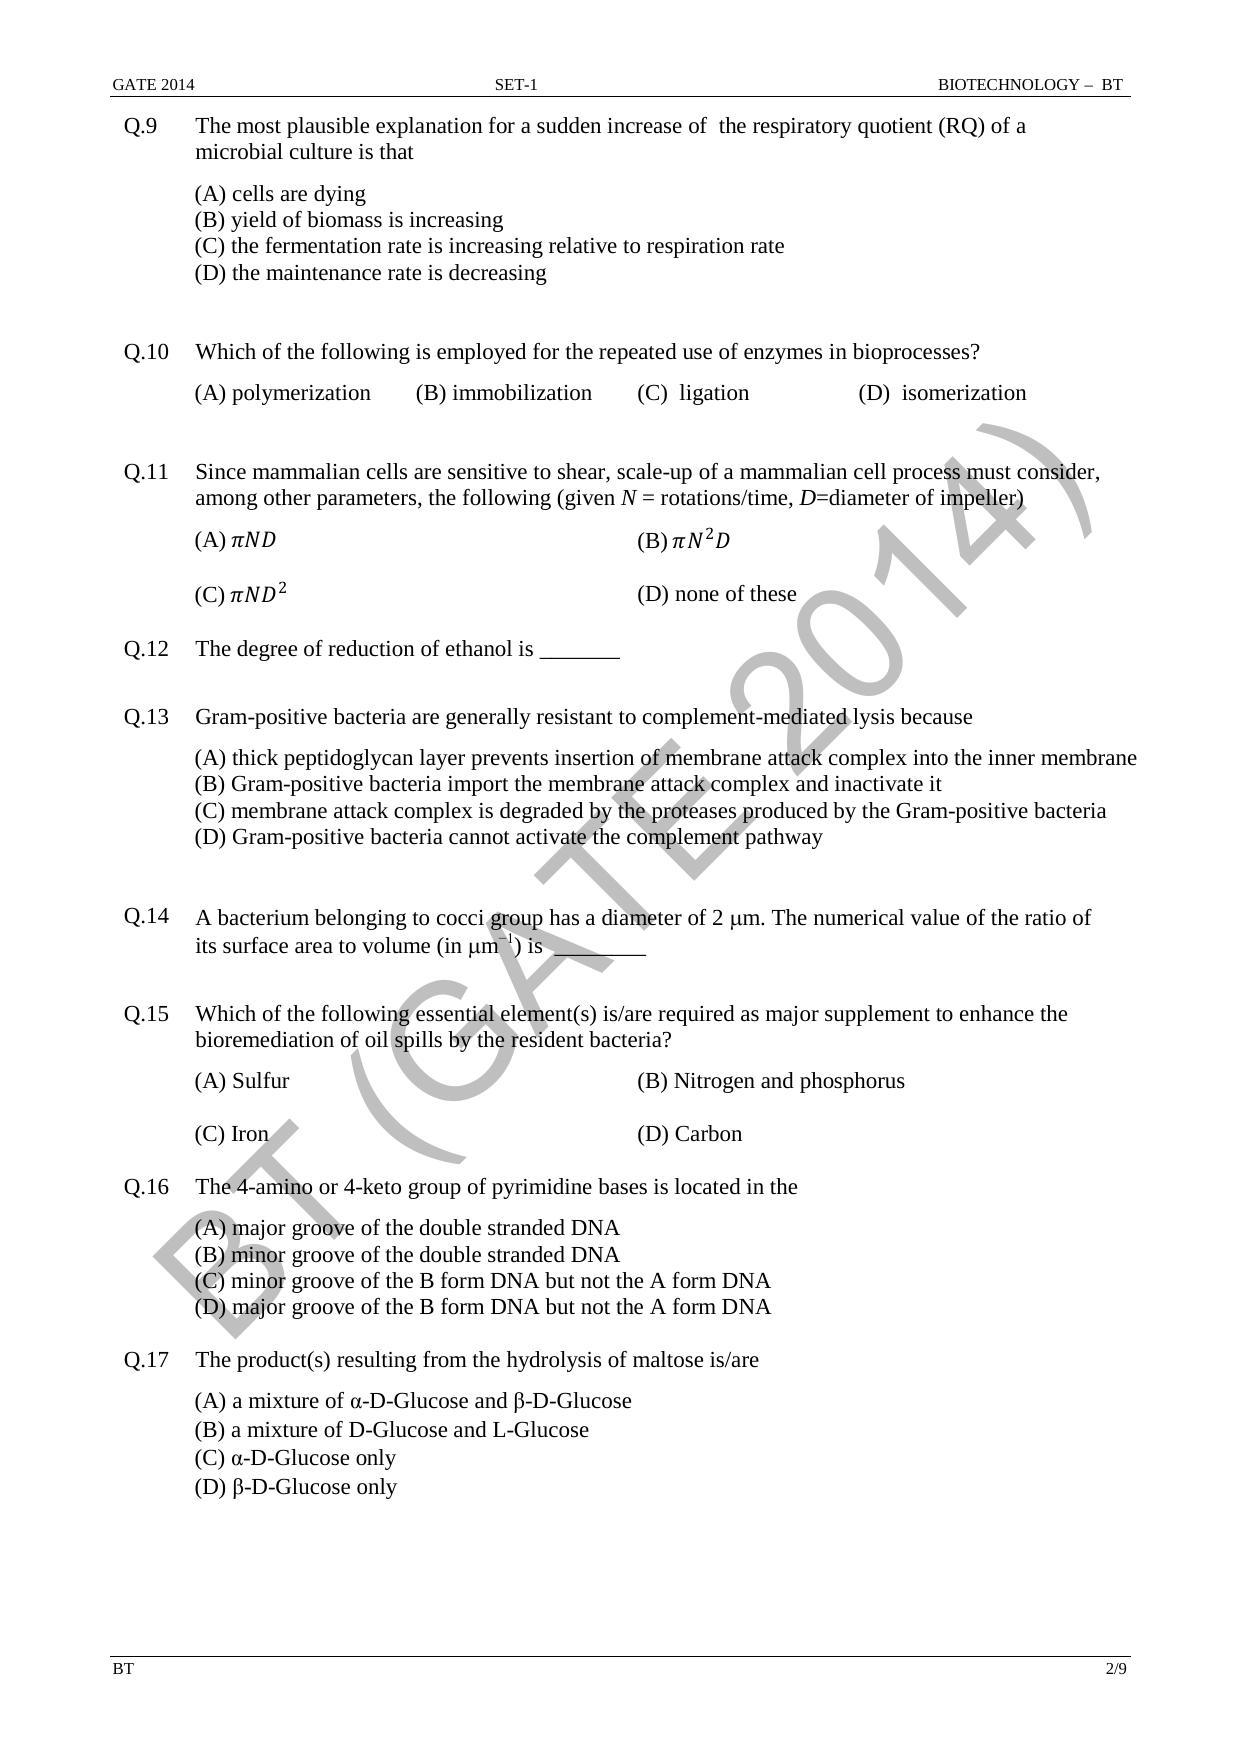 GATE 2014 Biotechnology (BT) Question Paper with Answer Key - Page 8